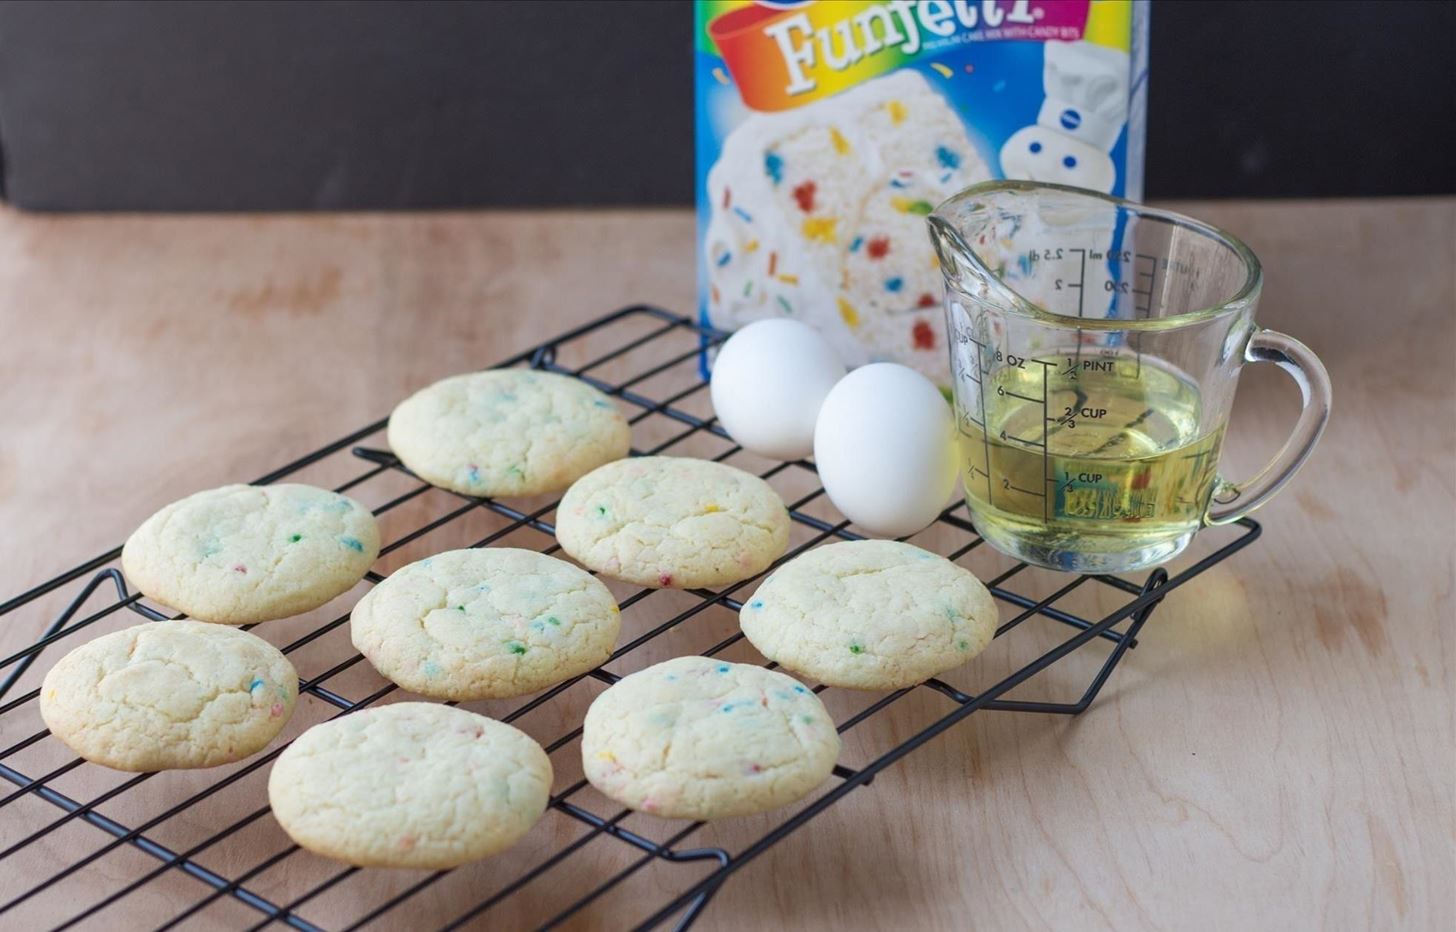 47 Baking Hacks That You Shouldn't Live Without